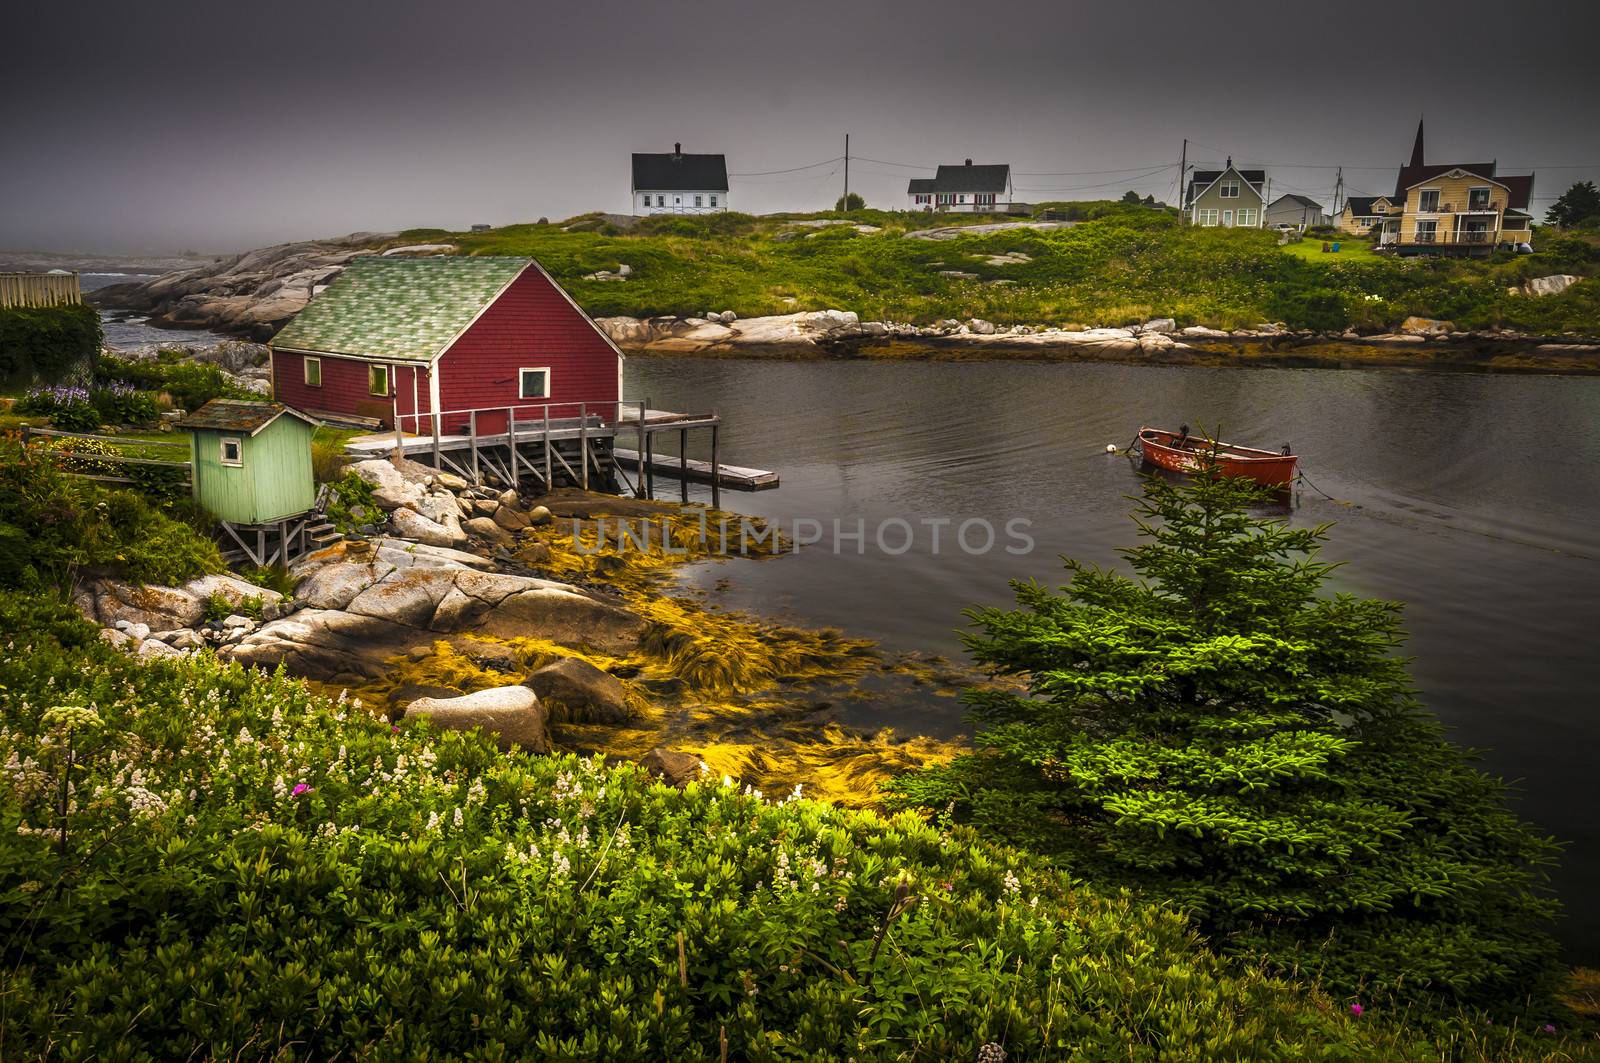 Peggy's Cove by vladikpod